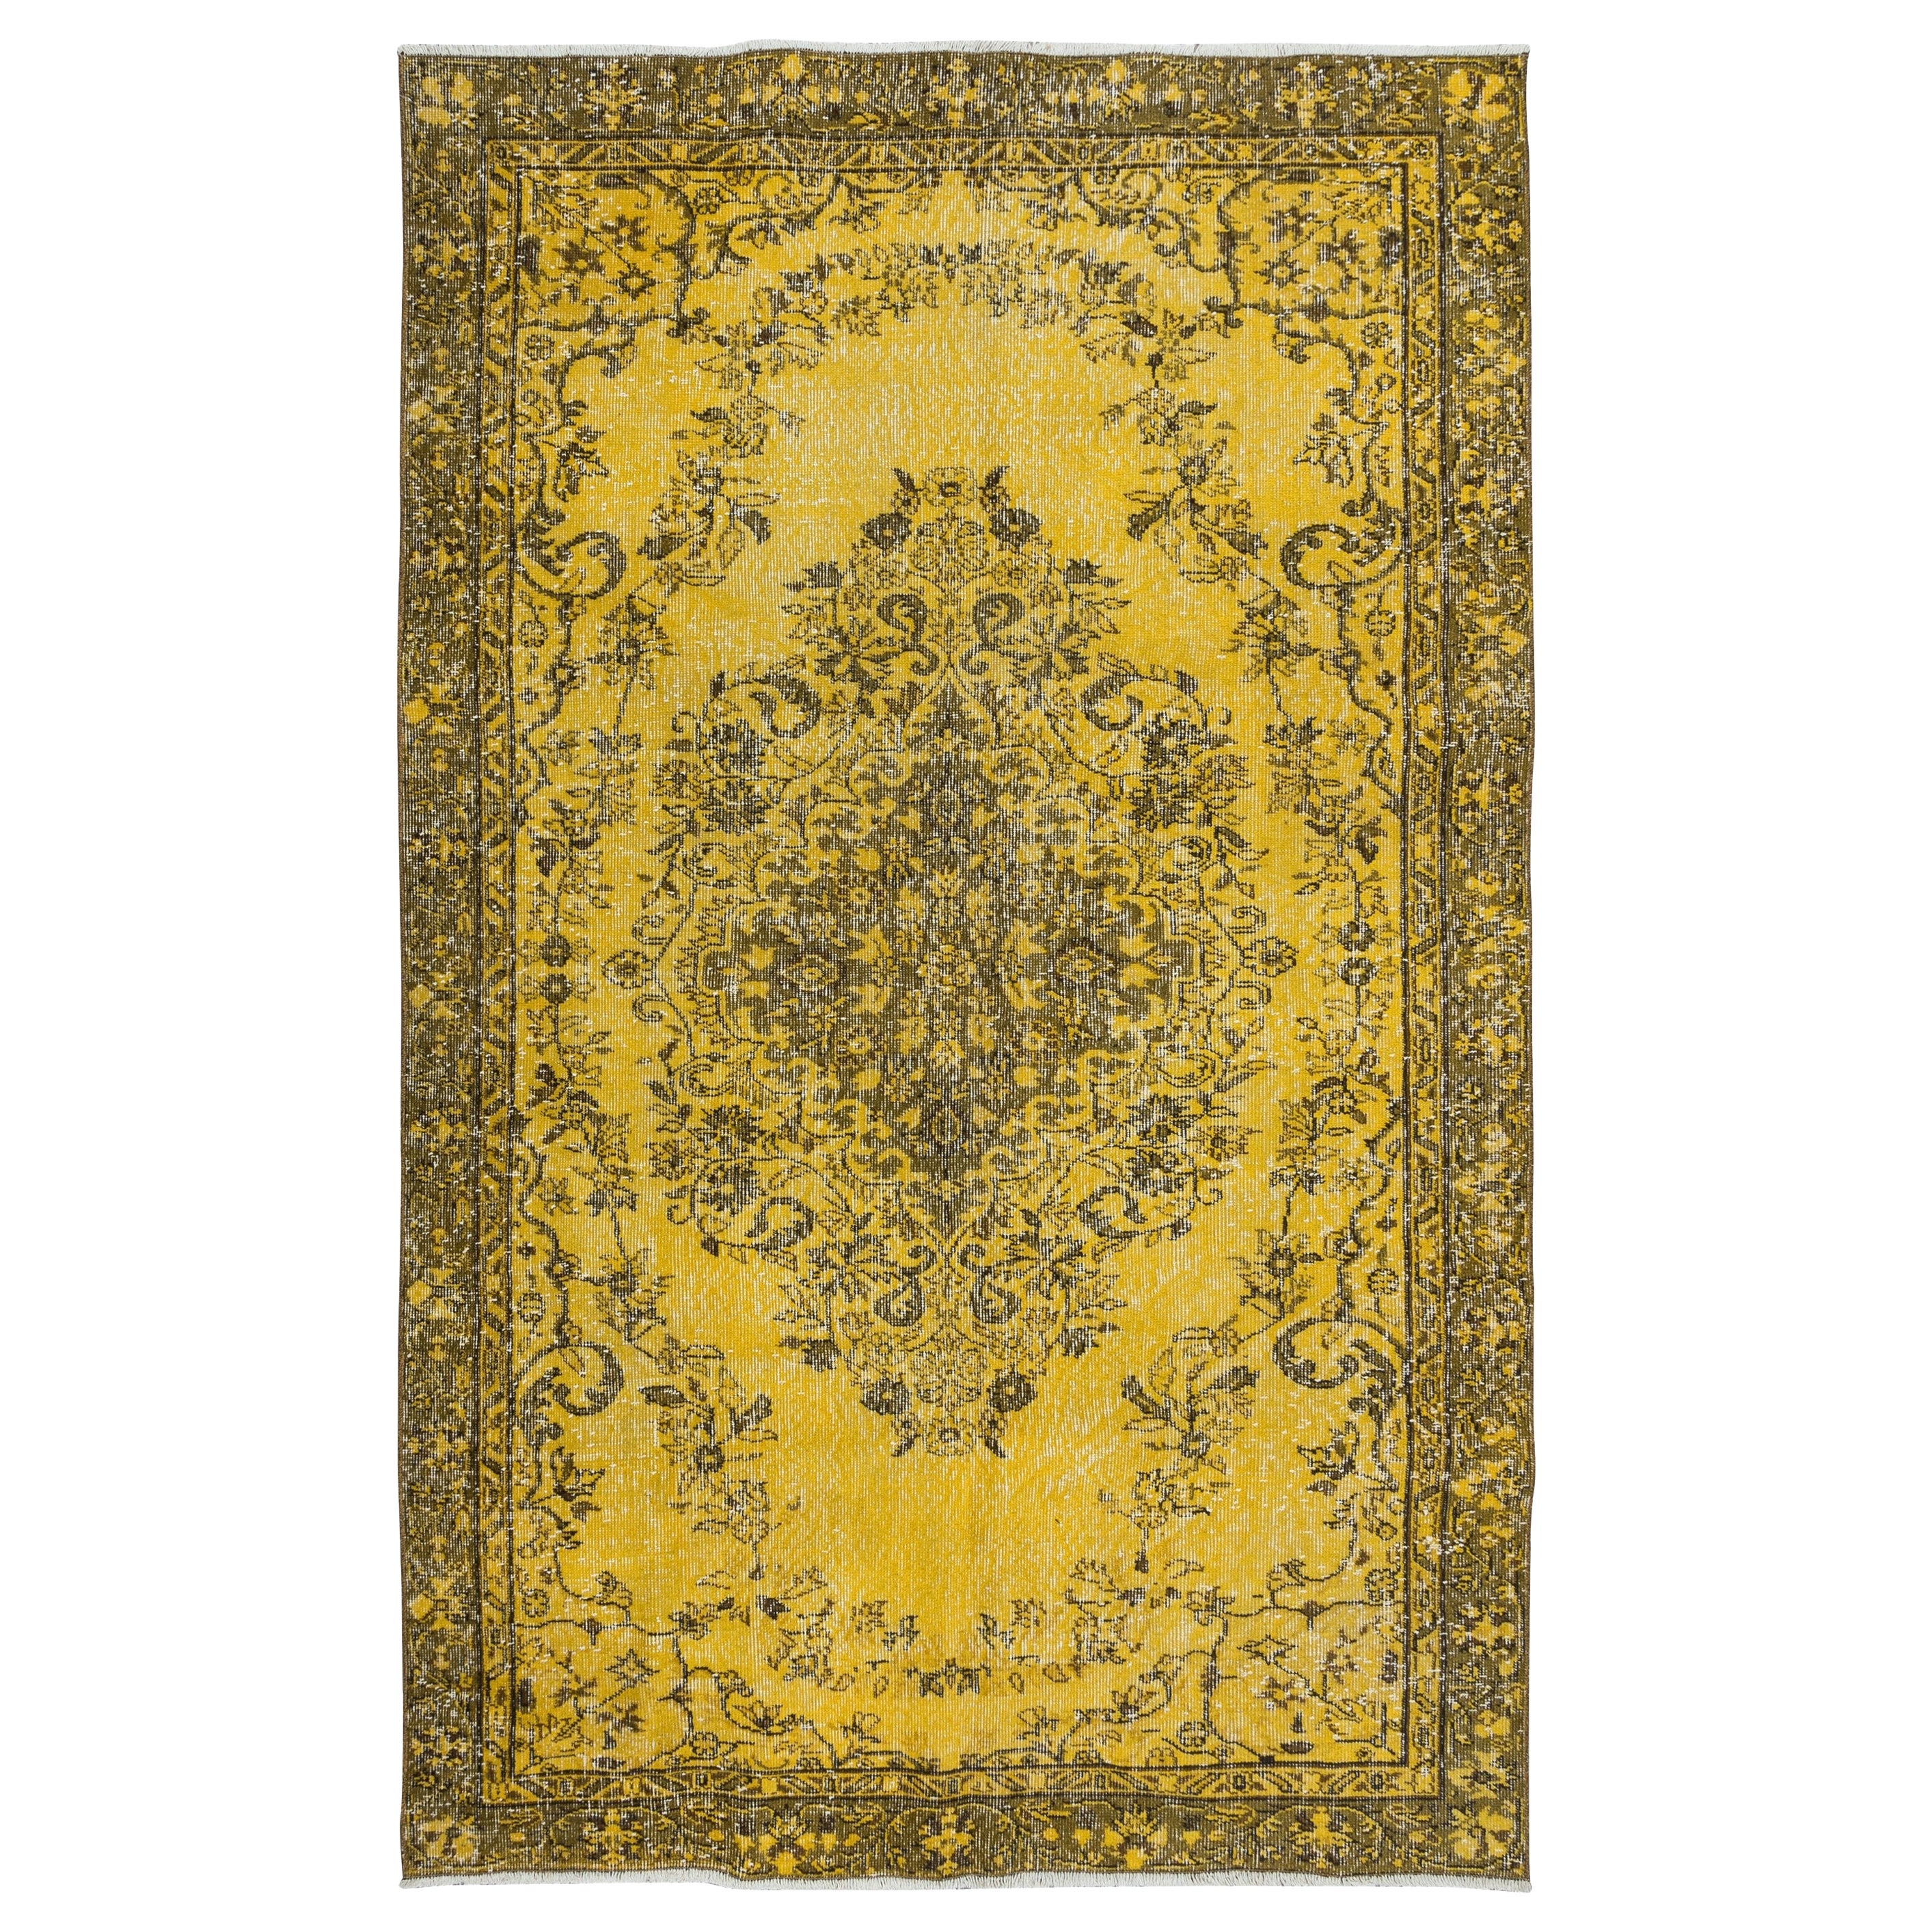 5.4x8.4 Ft Yellow Handmade Area Rug with Medallion Design, Living Room Carpet For Sale